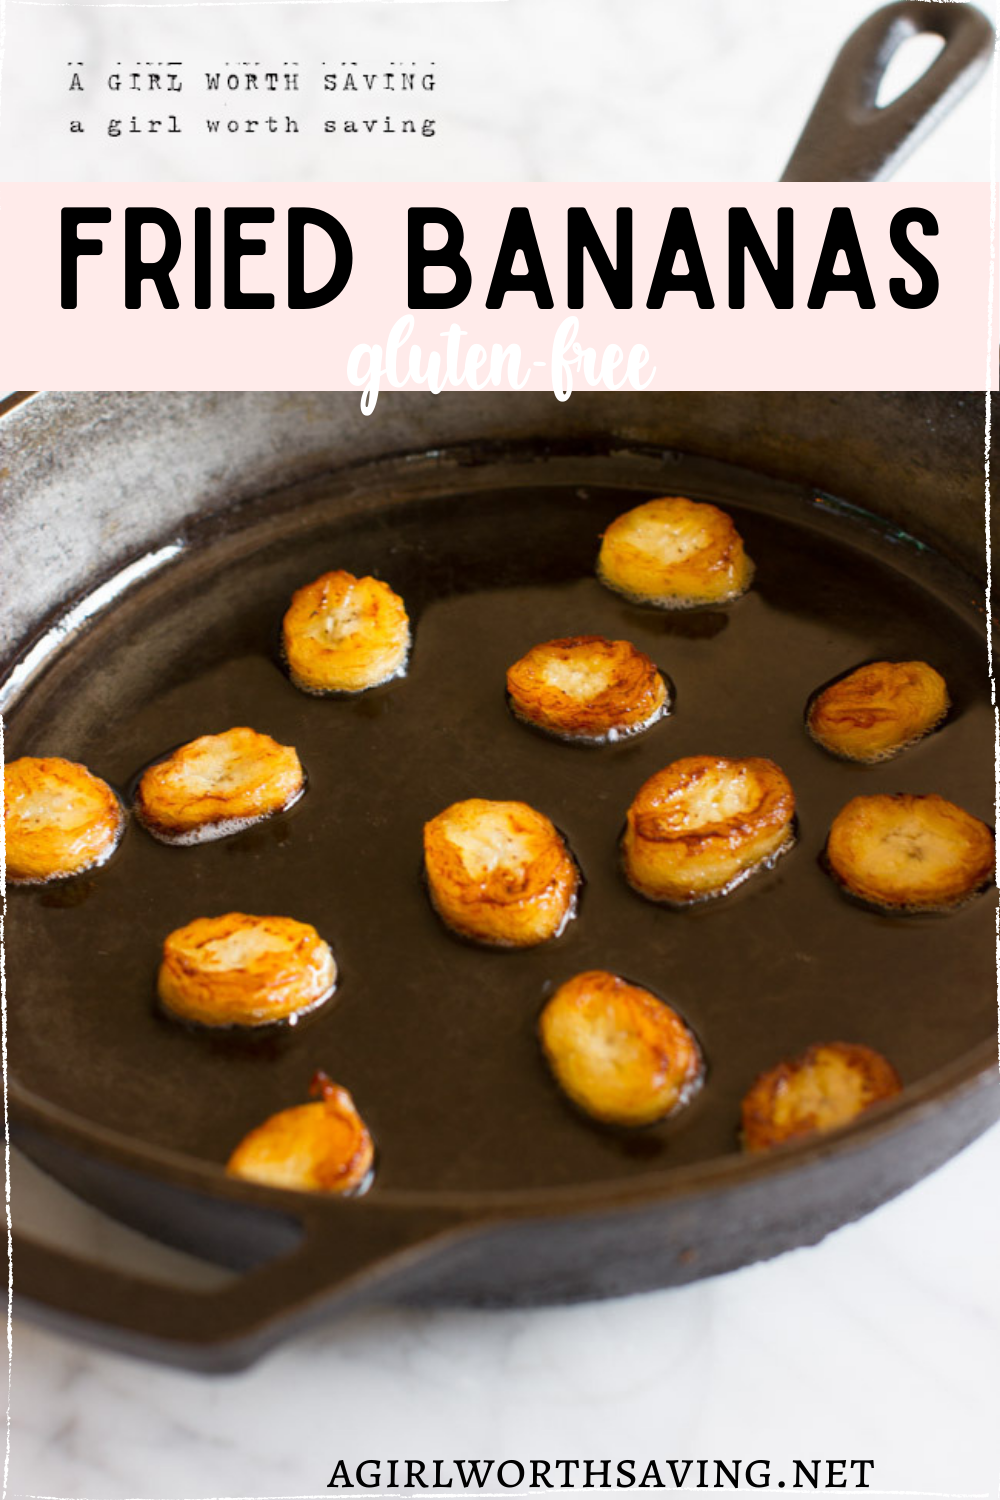 These simple pan-fried bananas recipes is perfect sprinkled with cinnamon and for an extra special treat, top it with vanilla ice cream.